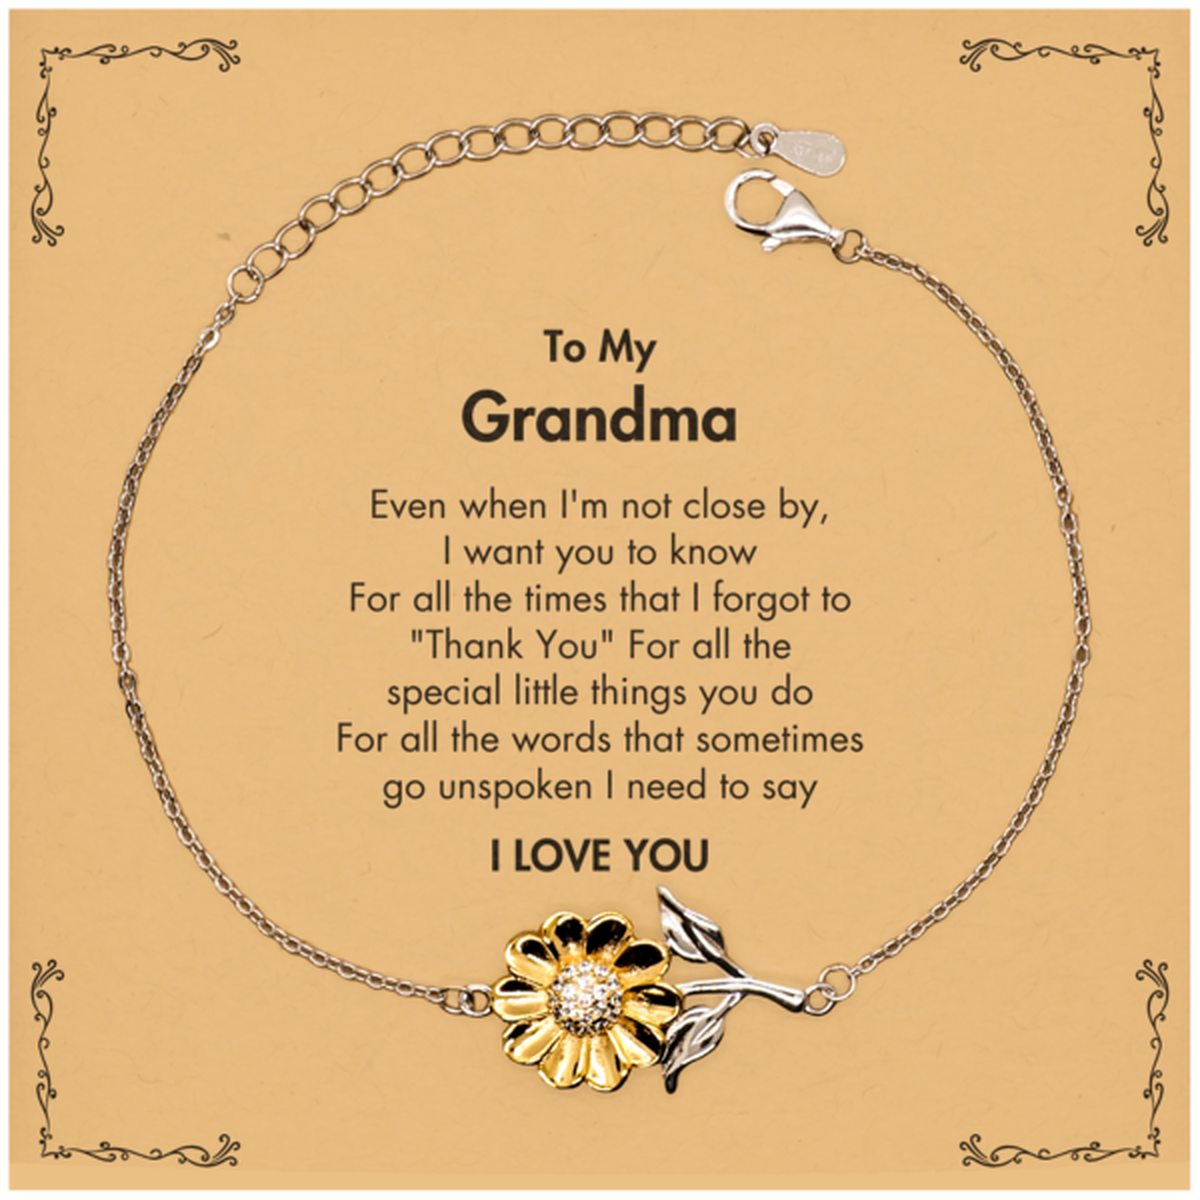 Thank You Gifts for Grandma, Keepsake Sunflower Bracelet Gifts for Grandma Birthday Mother's day Father's Day Grandma For all the words That sometimes go unspoken I need to say I LOVE YOU